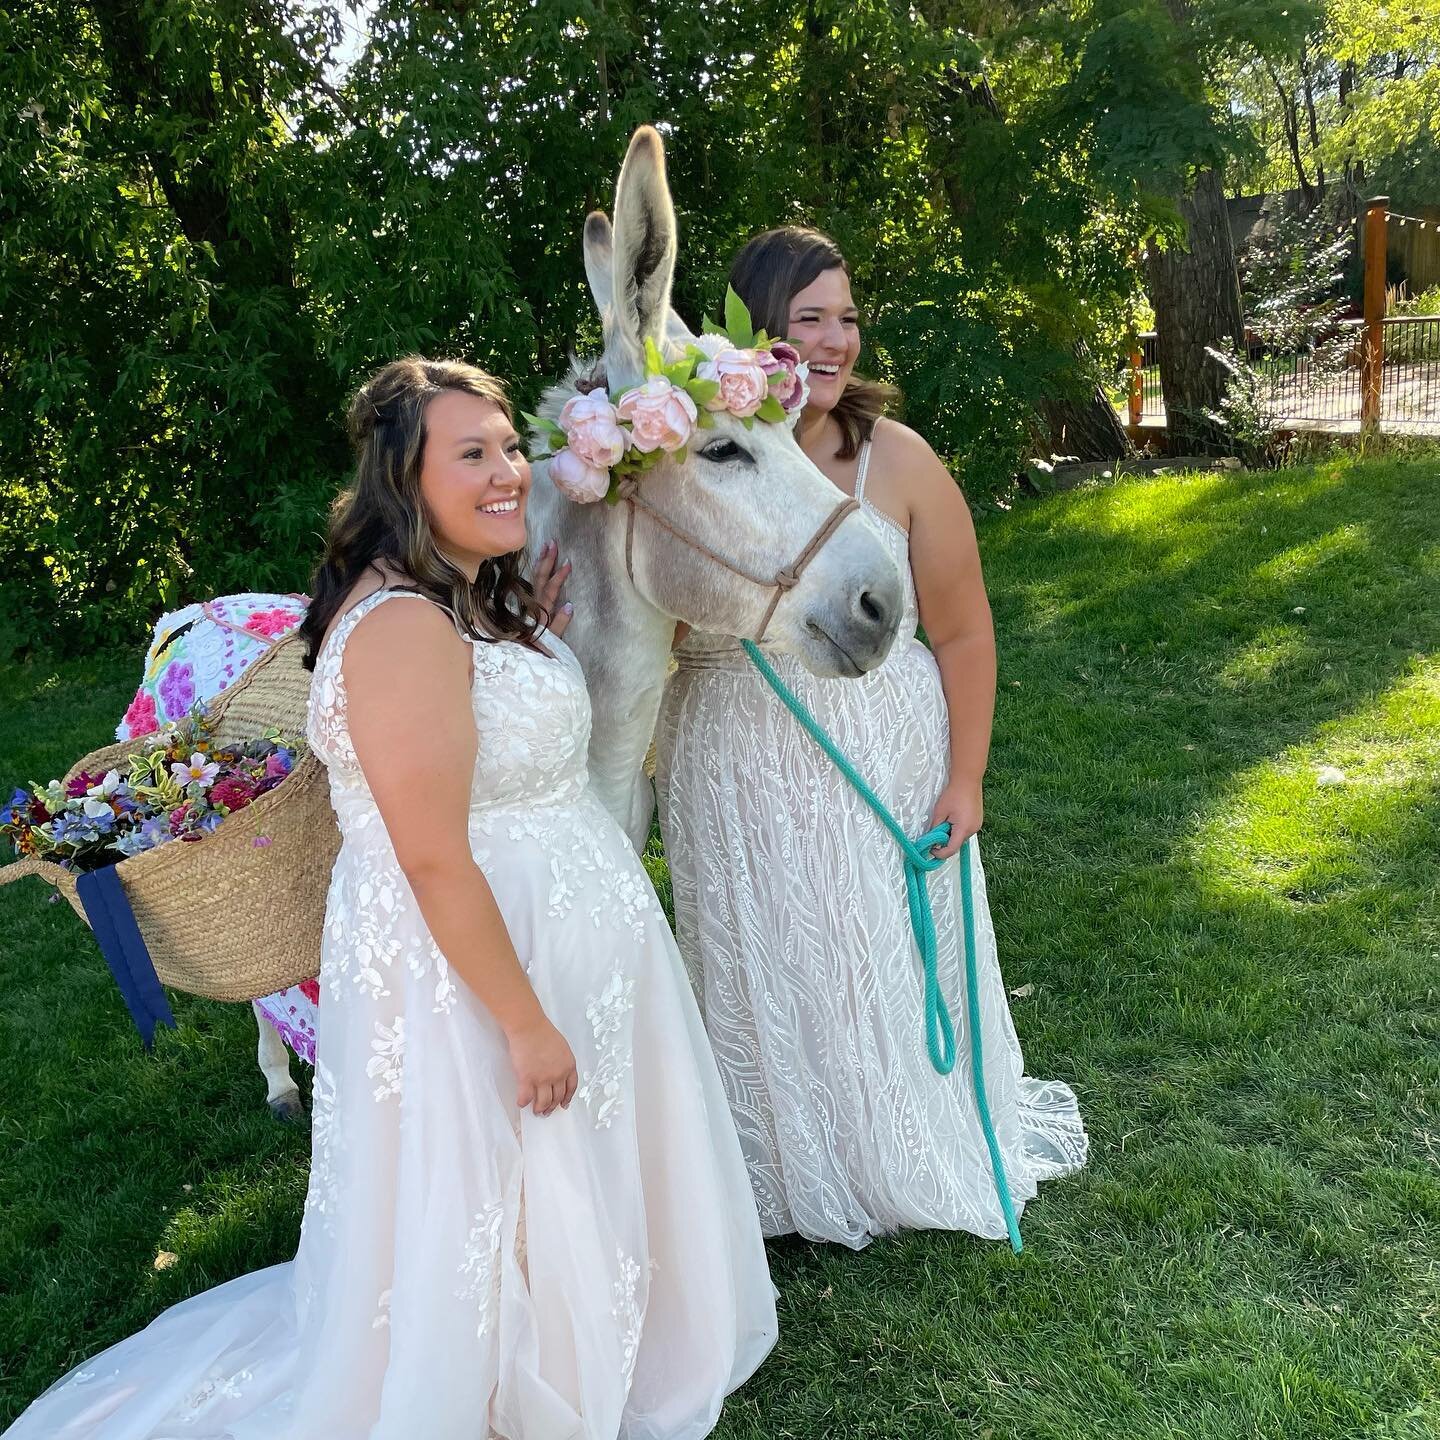 I had fun with these brides today then Iris joined in and we smothered them then I accidentally tried on Lucia&rsquo;s wedding shoe ooops @lyonsfarmette @dahliaeventslyons @sugarpinecatering #coloradoweddings #weddingideas #weddingideas_brides